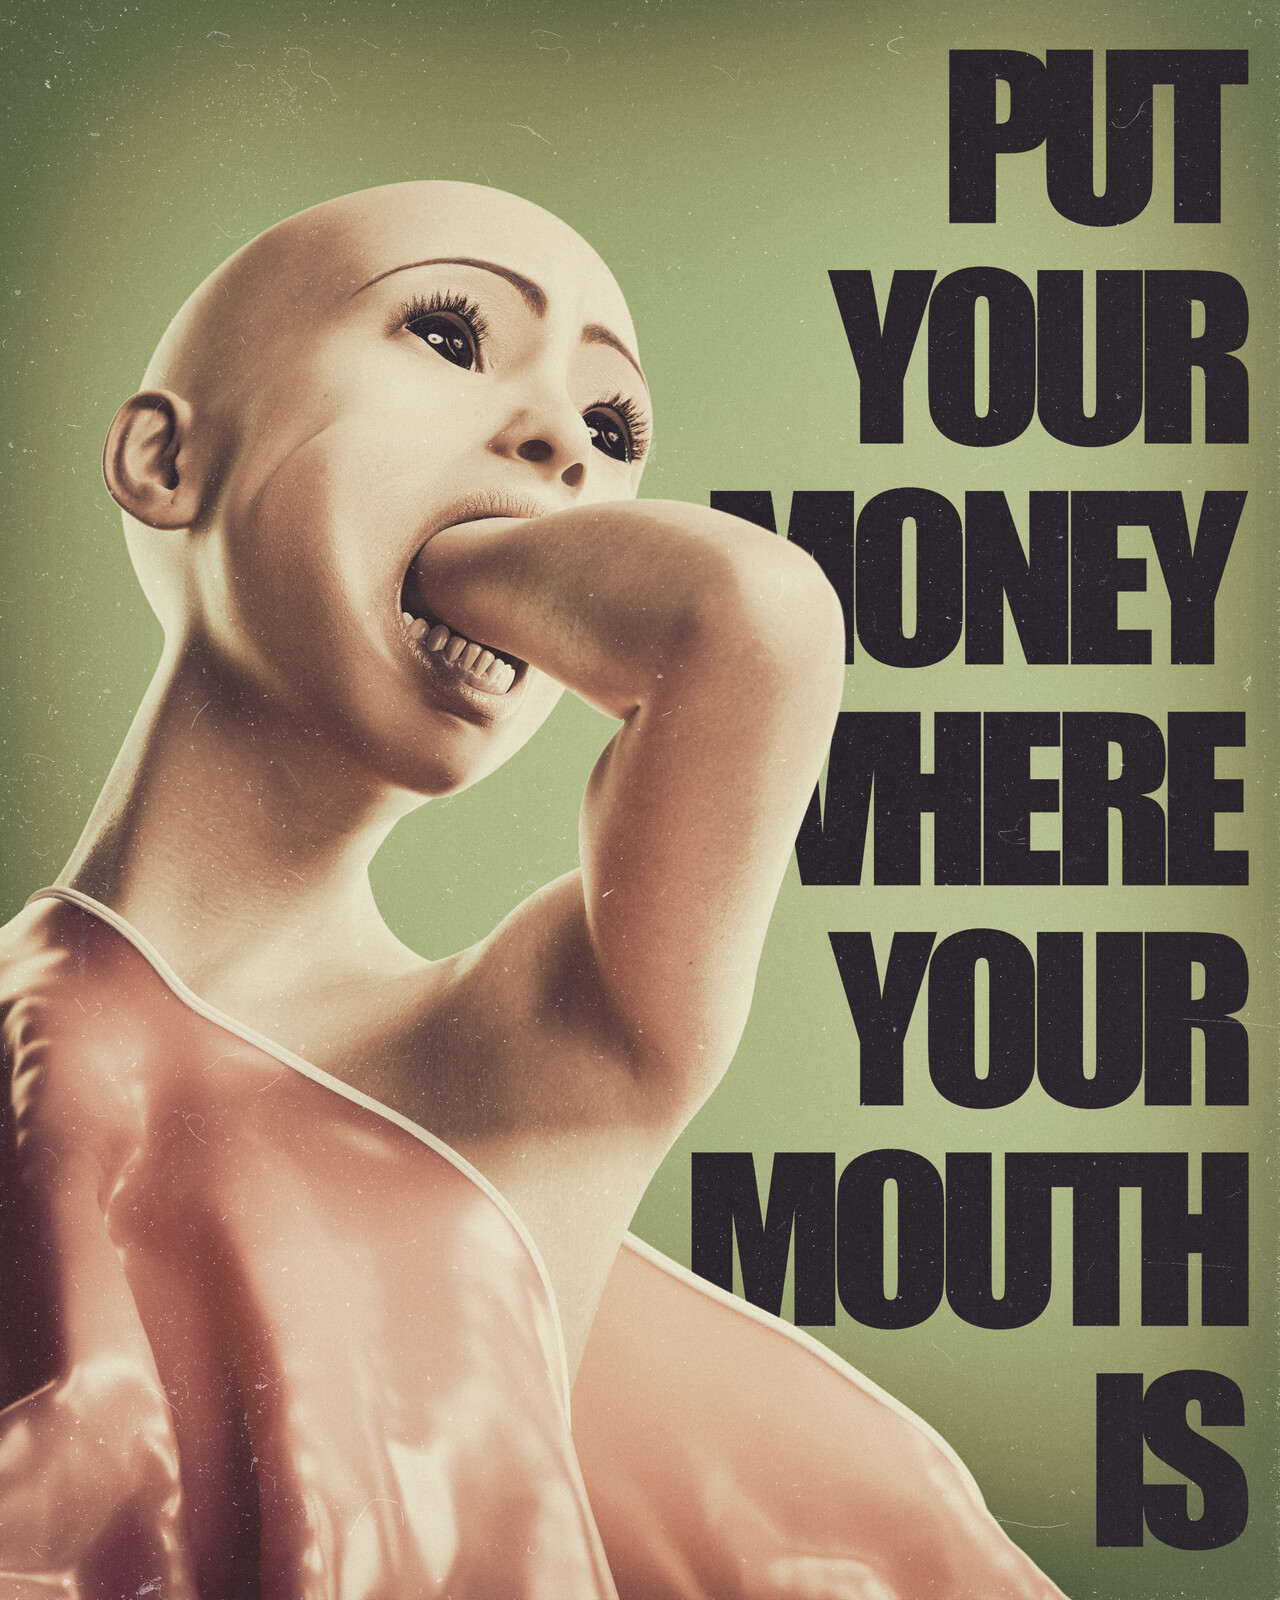 PUT YOUR MONEY WHERE YOUR MOUTH IS [310 - 11.01.20]